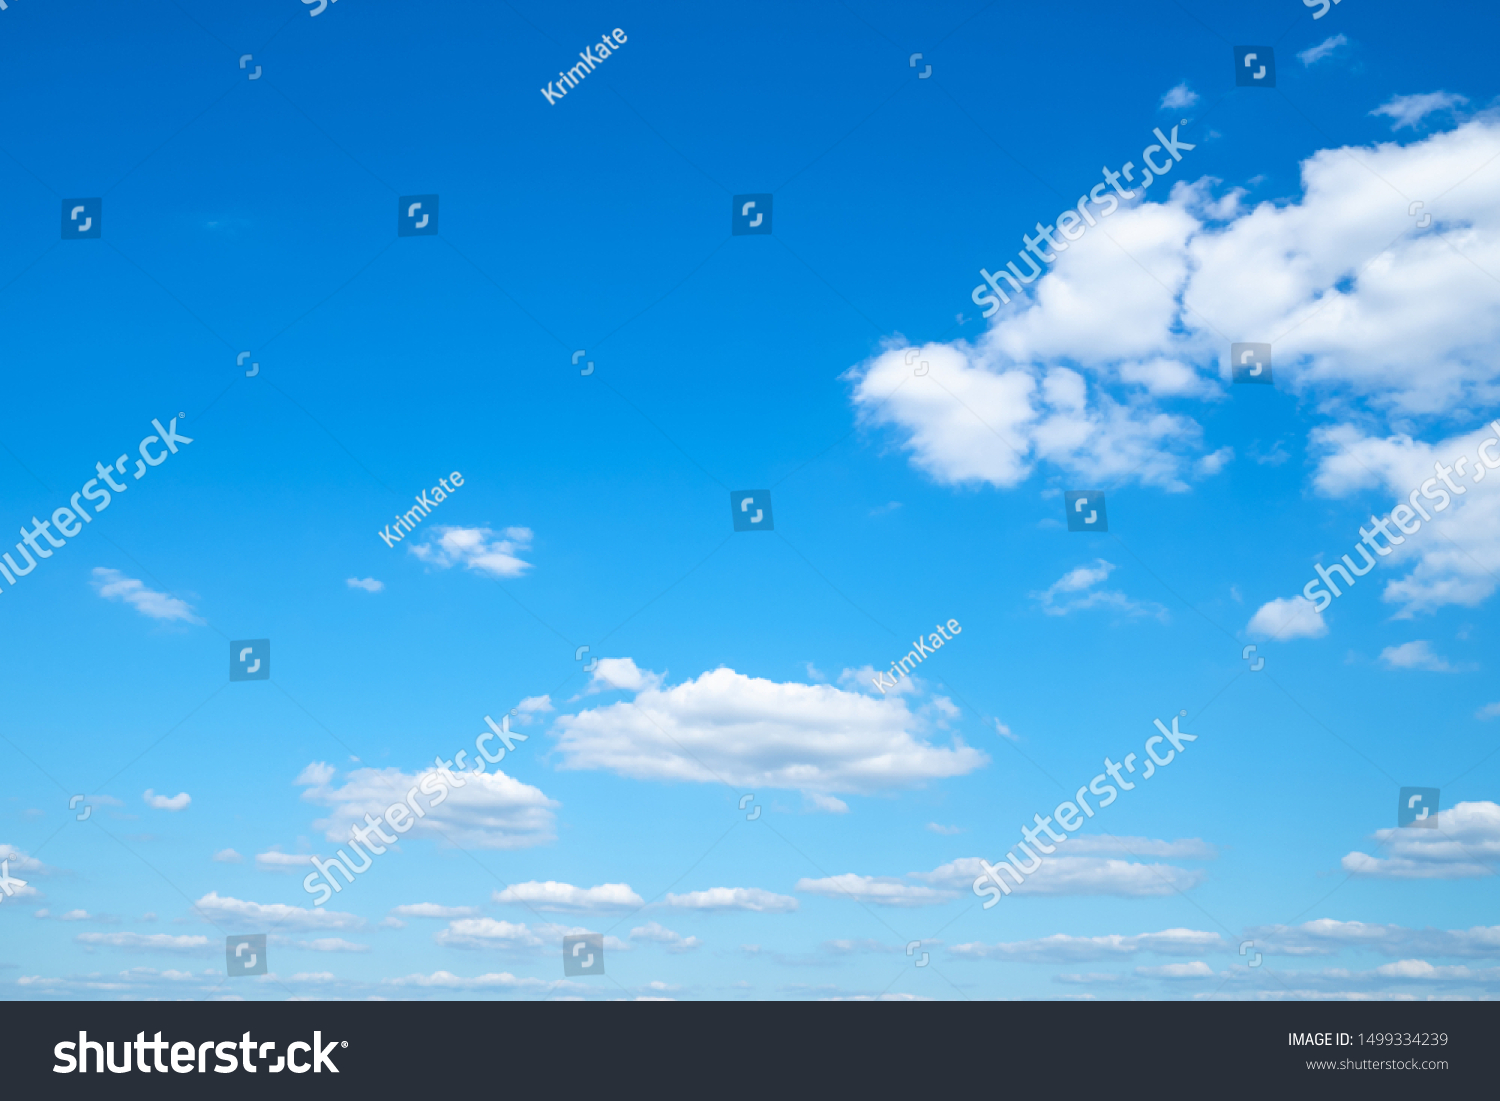 little light cumuli clouds in blue sky on sunny august day #1499334239